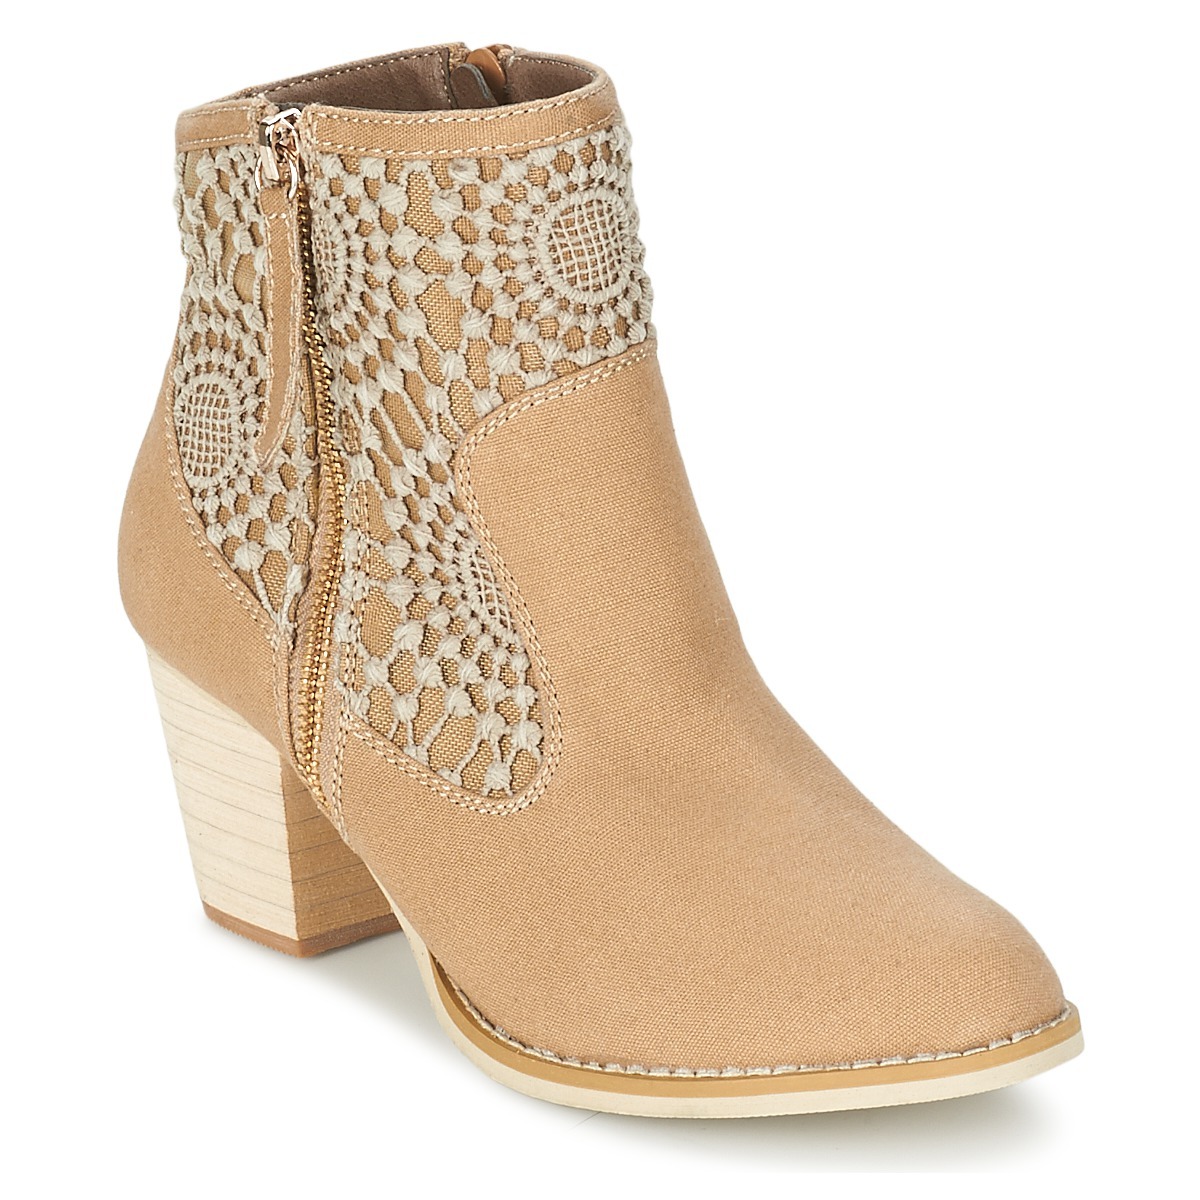 Spartoo Lady Ankle Boots Beige from Moony Mood GOOFASH